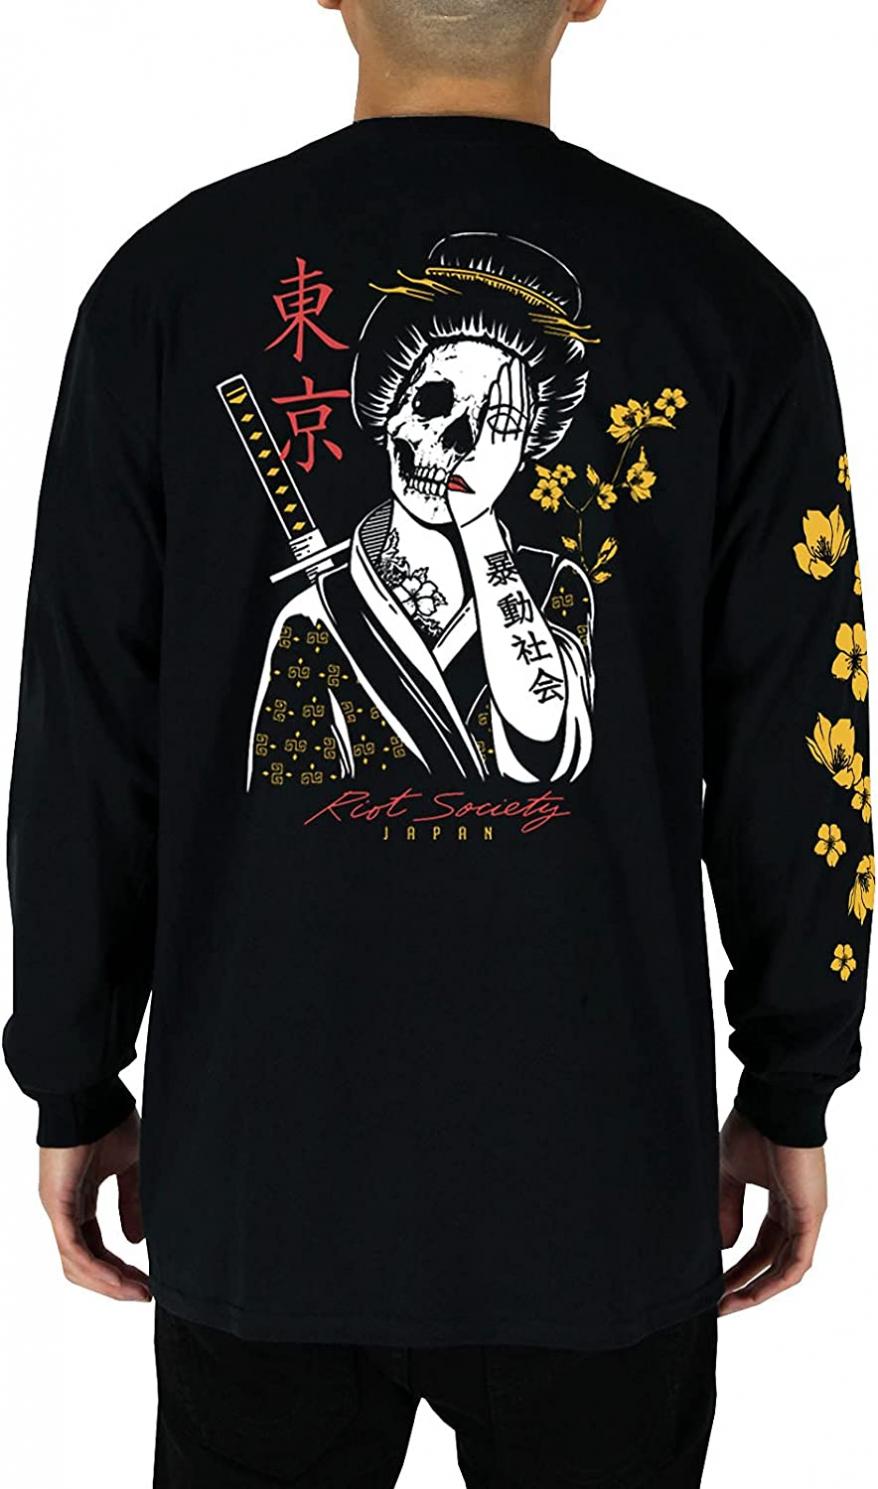 Riot Society Men's Long Sleeve Graphic and Embroidered Fashion T-Shirt